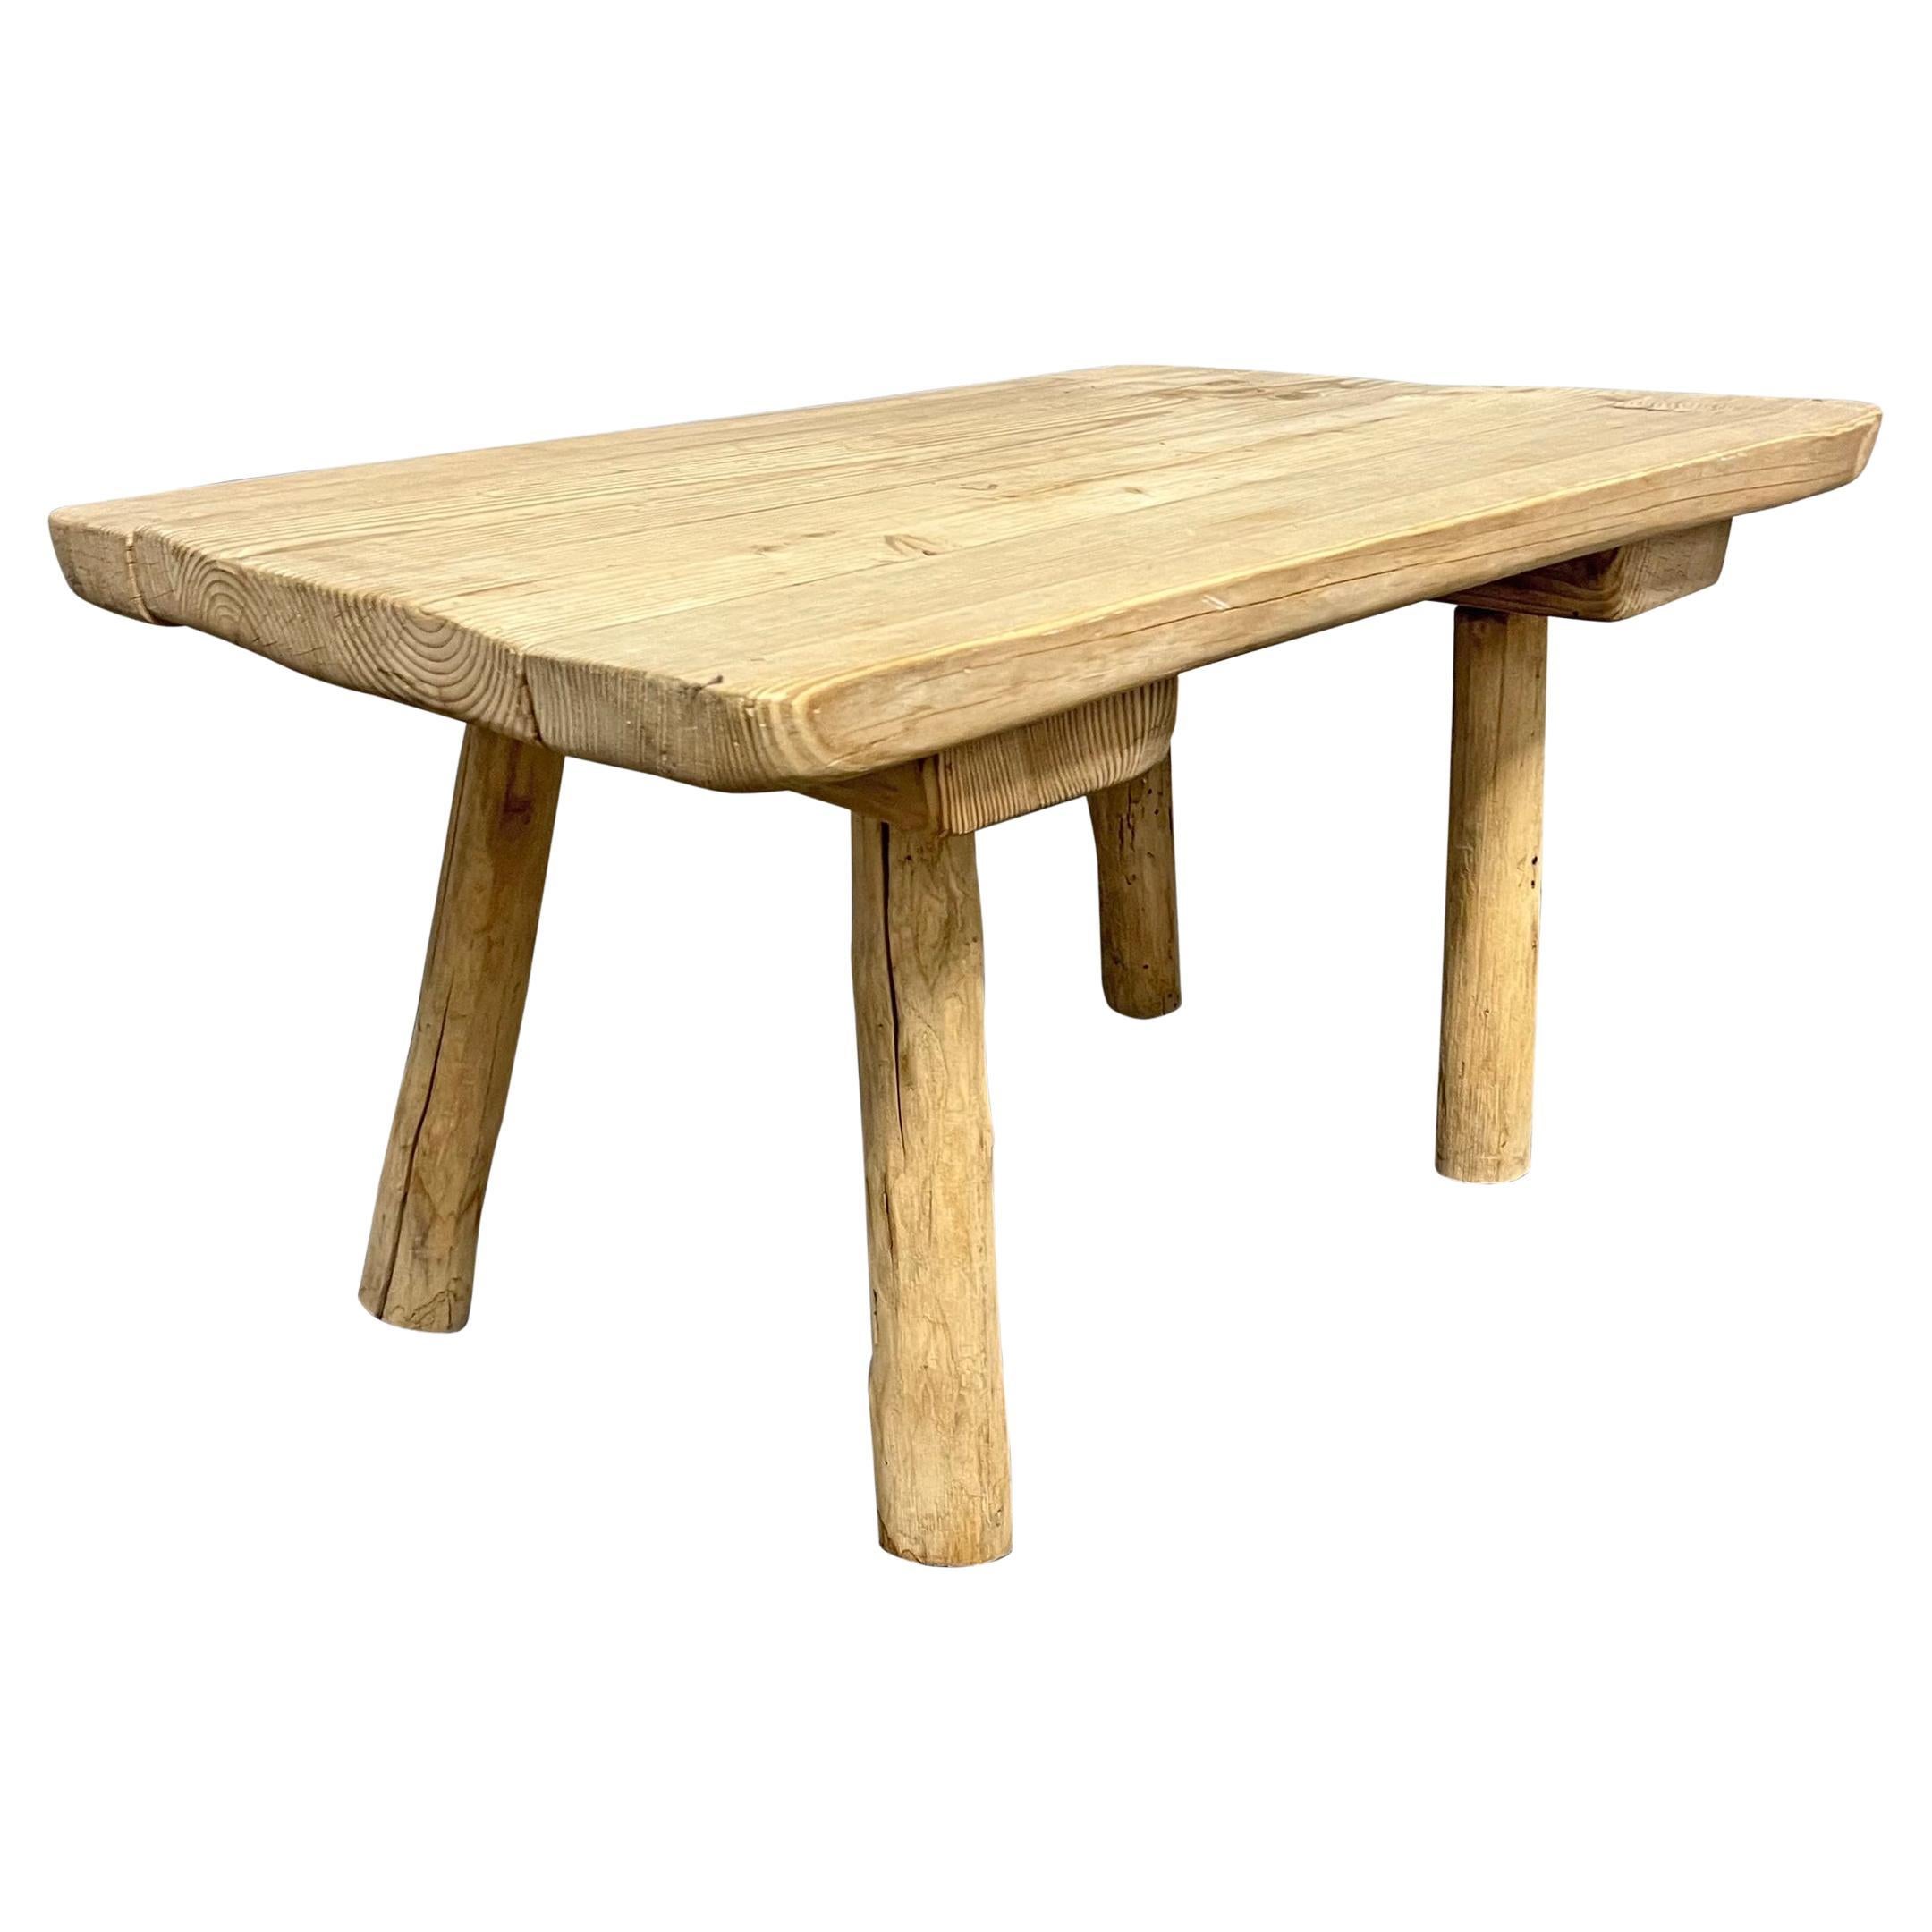 Mid-20th Century French Modernist Pine Low Table For Sale